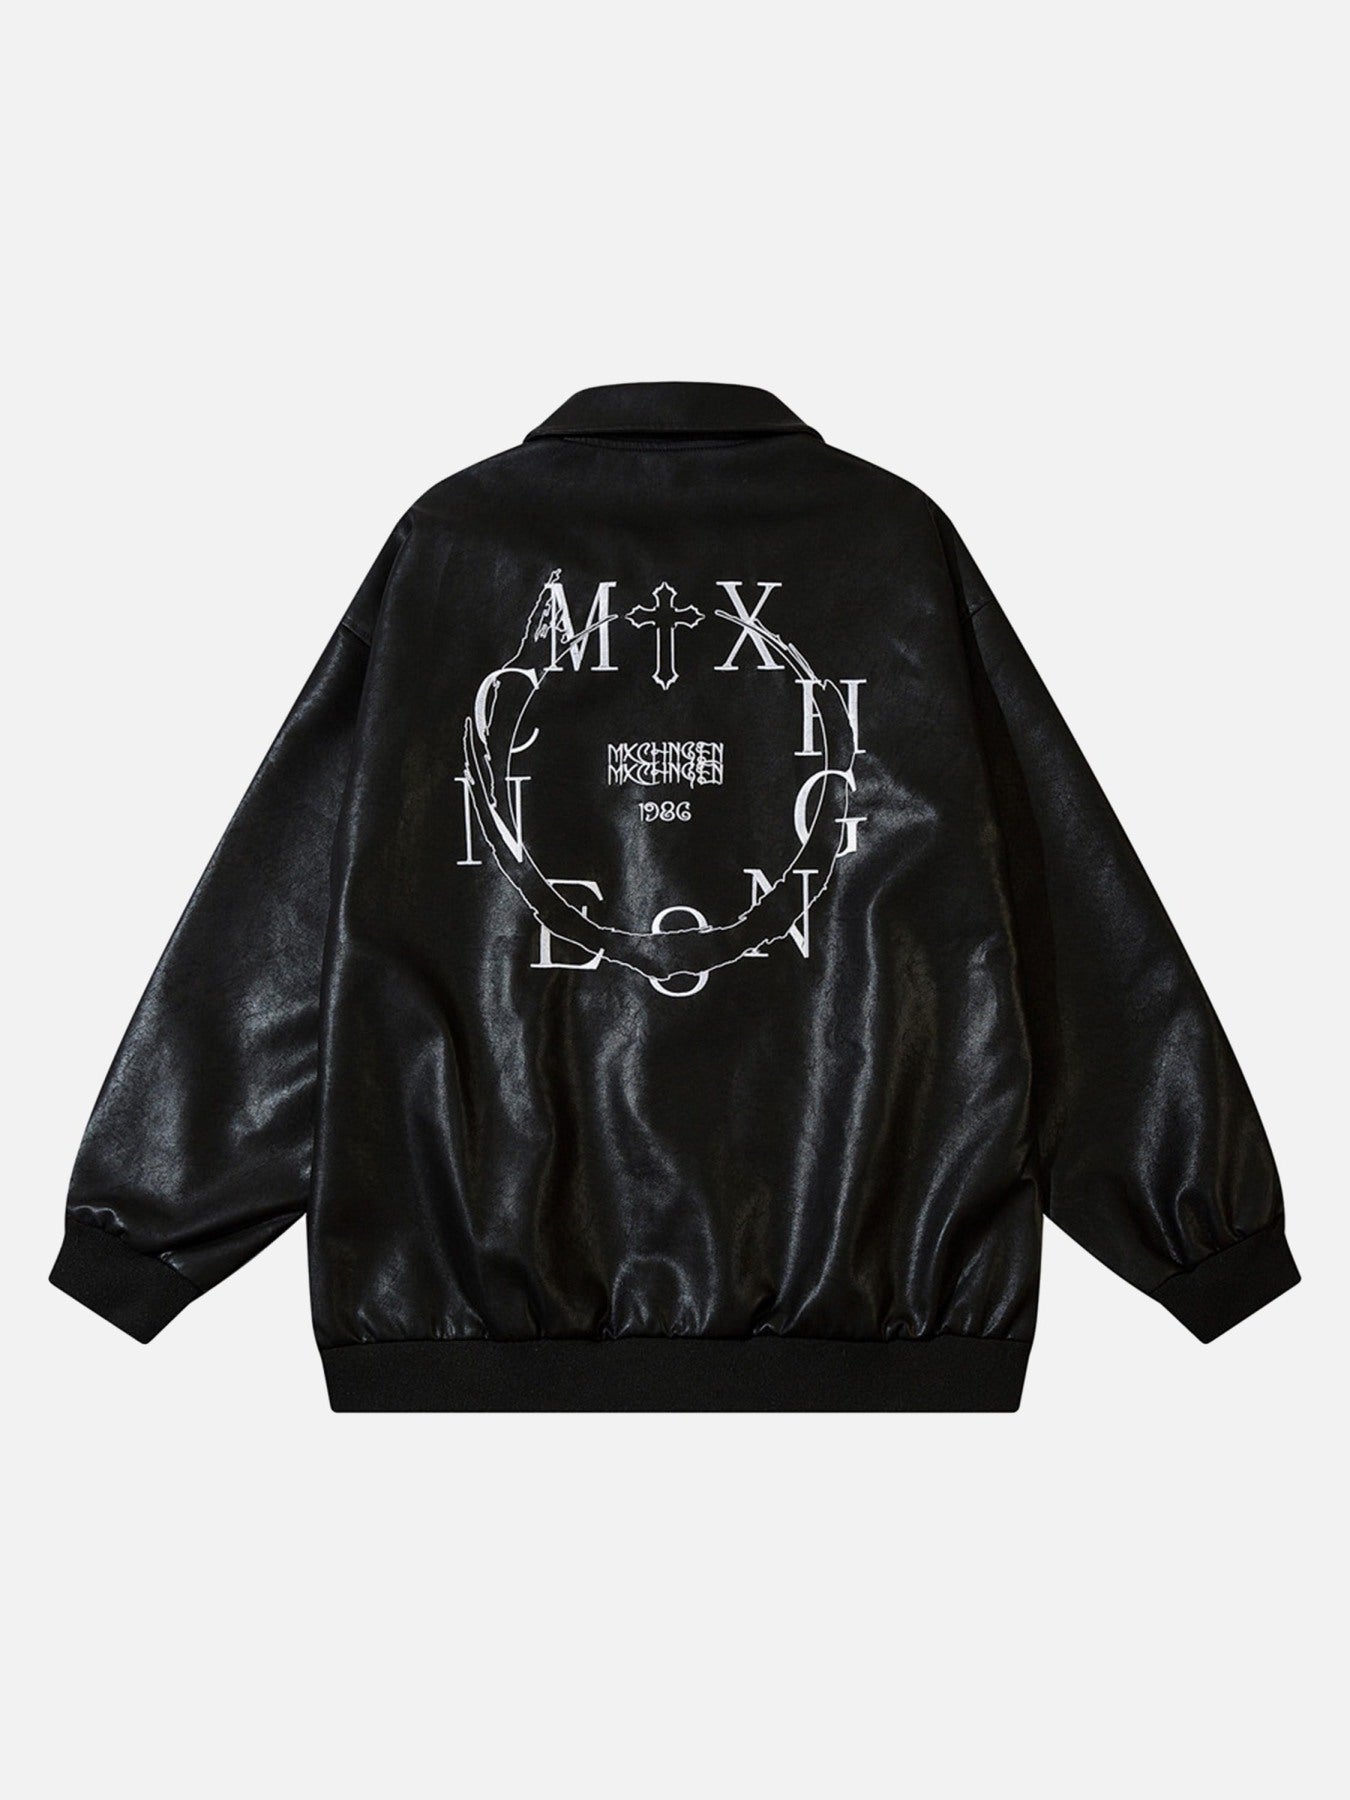 The Supermade Embroidered Monogrammed Leather Jacket